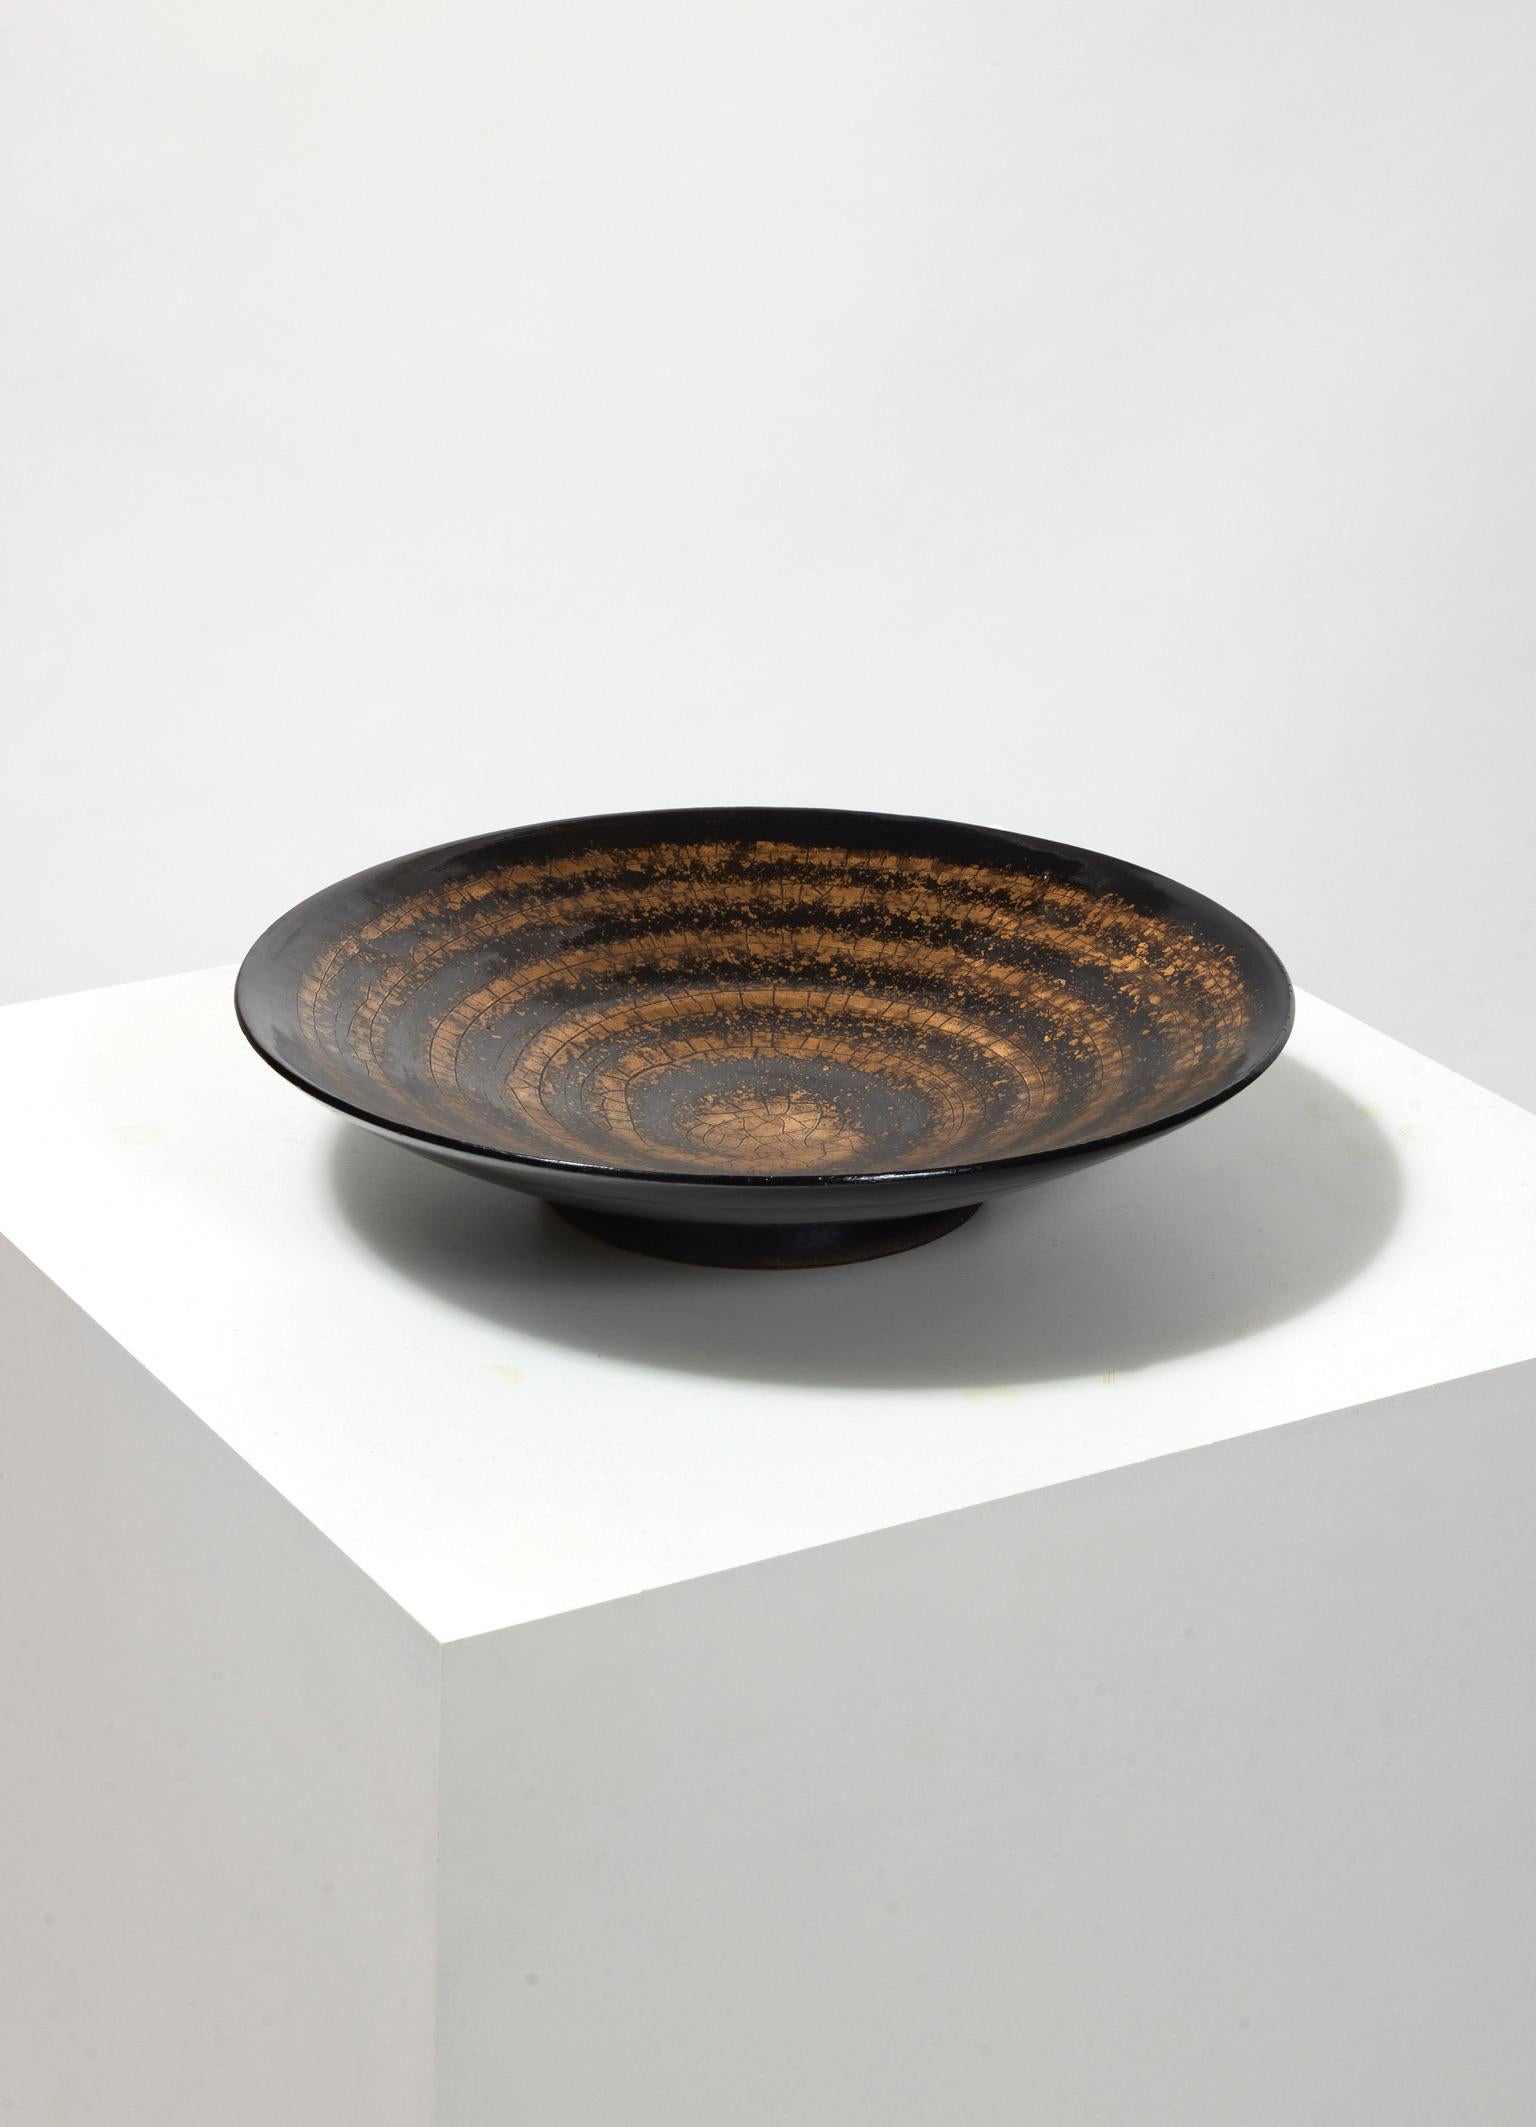 Ceramic bowl with black enamel and spiral pattern drawn in cracked gold.

Signed under the base 